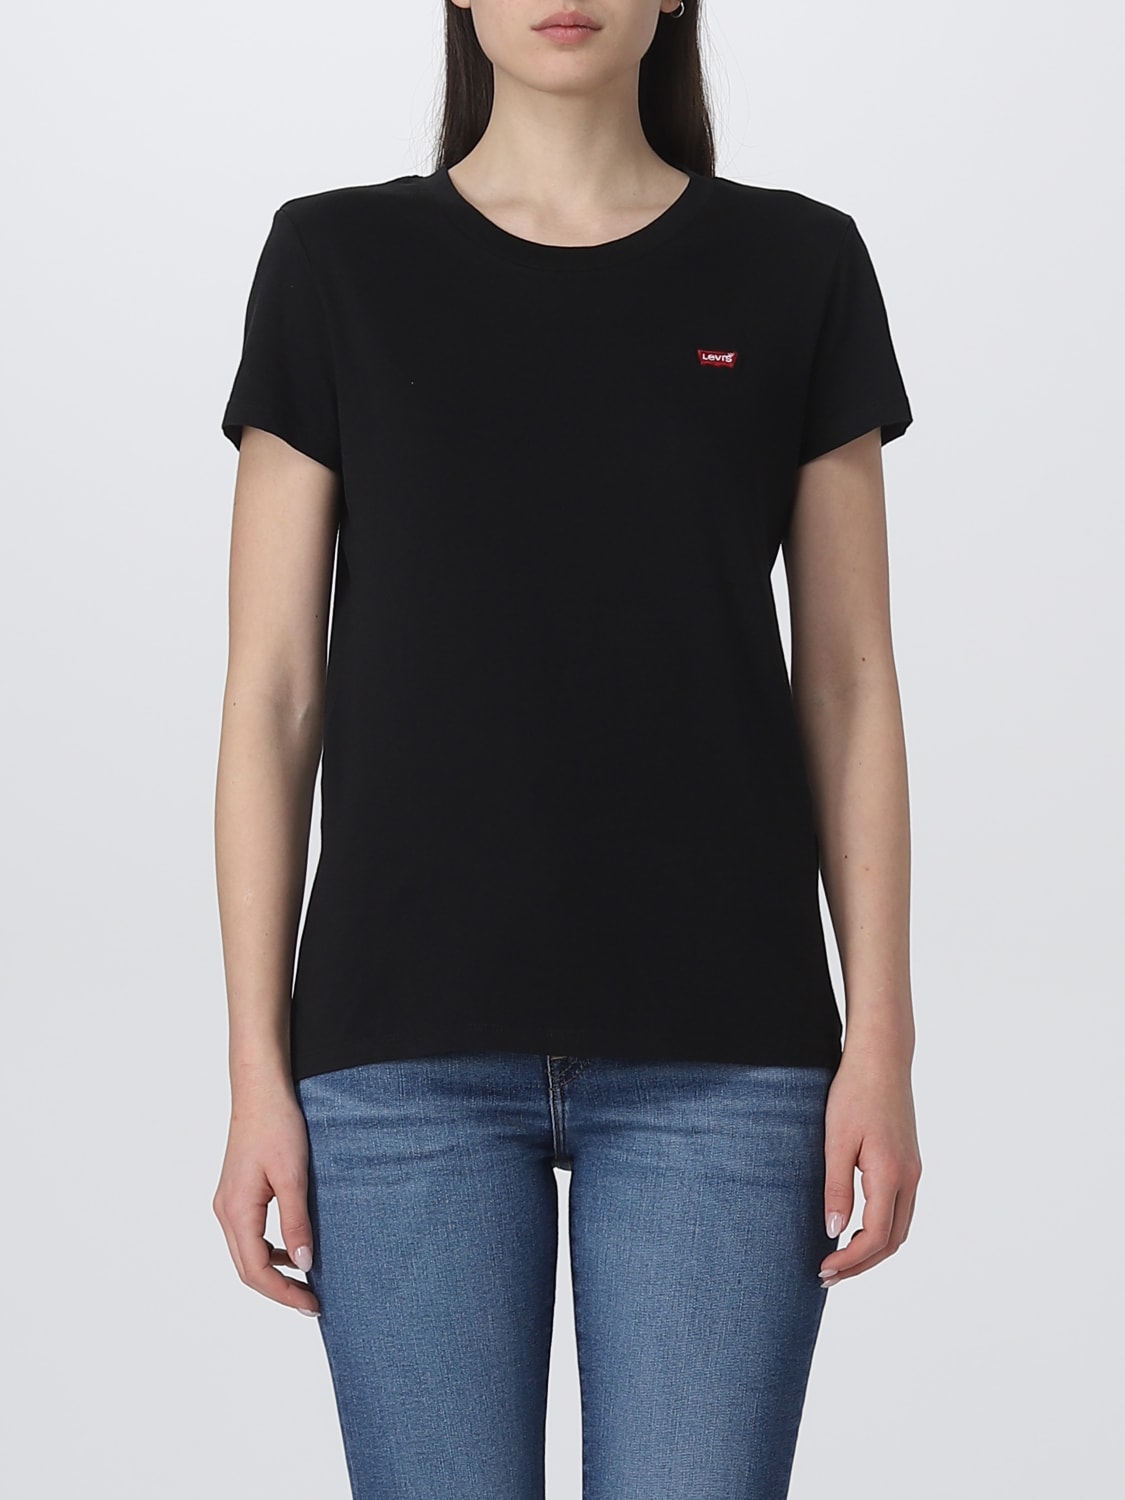 LEVI'S: for woman - Black Levi's t-shirt 391850008 online GIGLIO.COM